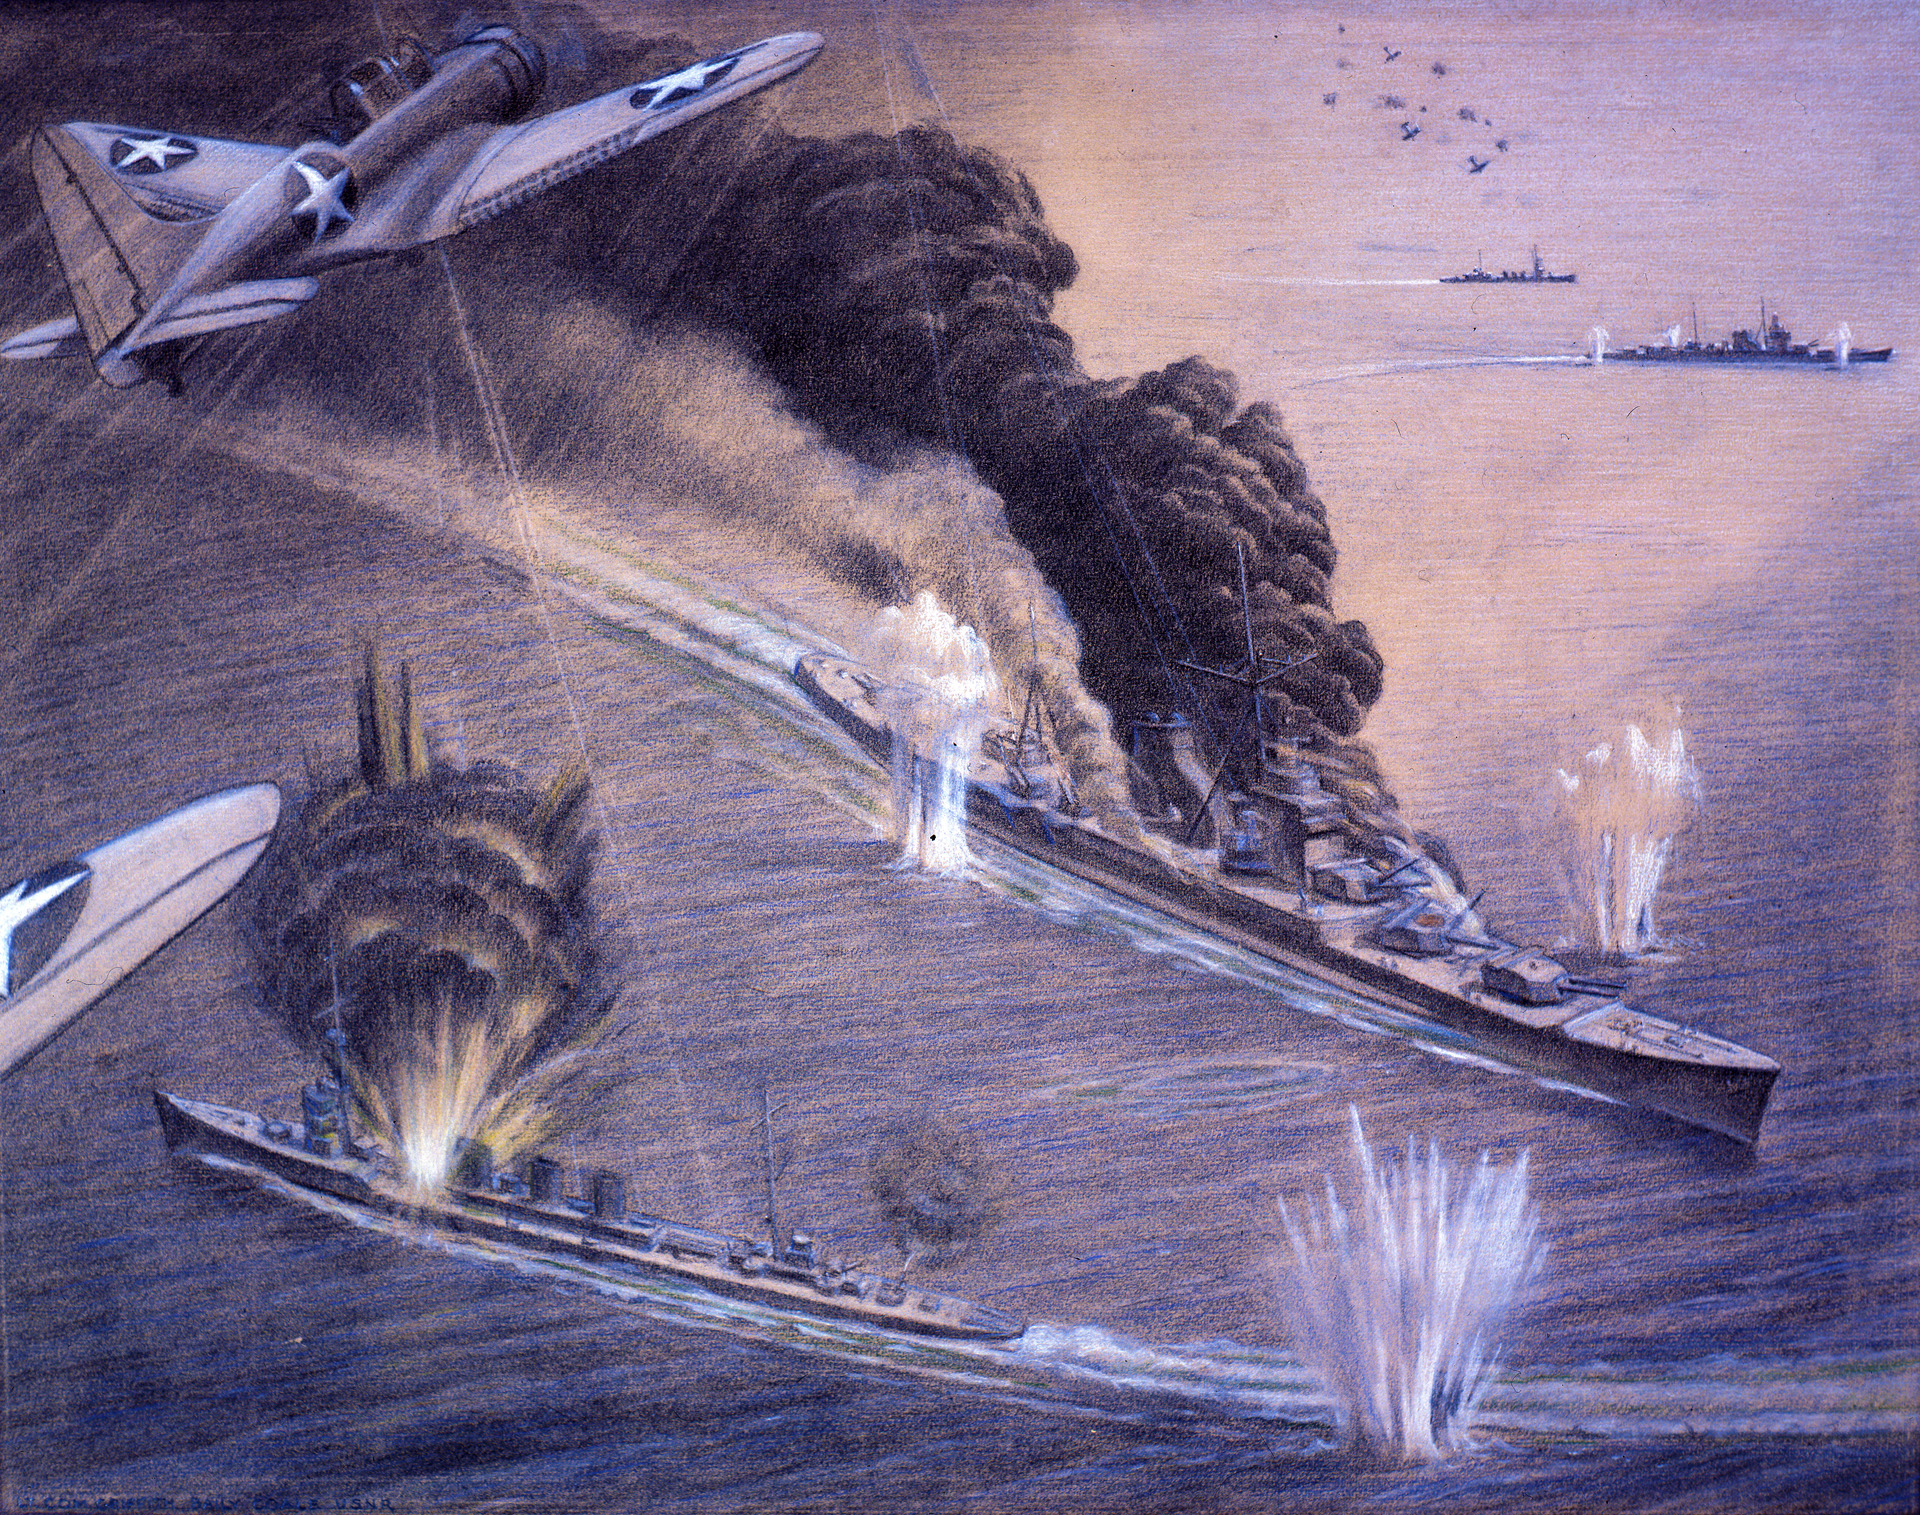 In this painting of the Battle of Midway, forces of the Imperial Japanese Navy are under attack by American aircraft. During the battle, the cruiser Mogami and her sister Mikuma collided. Mikuma was eventually sunk, while Mogami was heavily damaged.